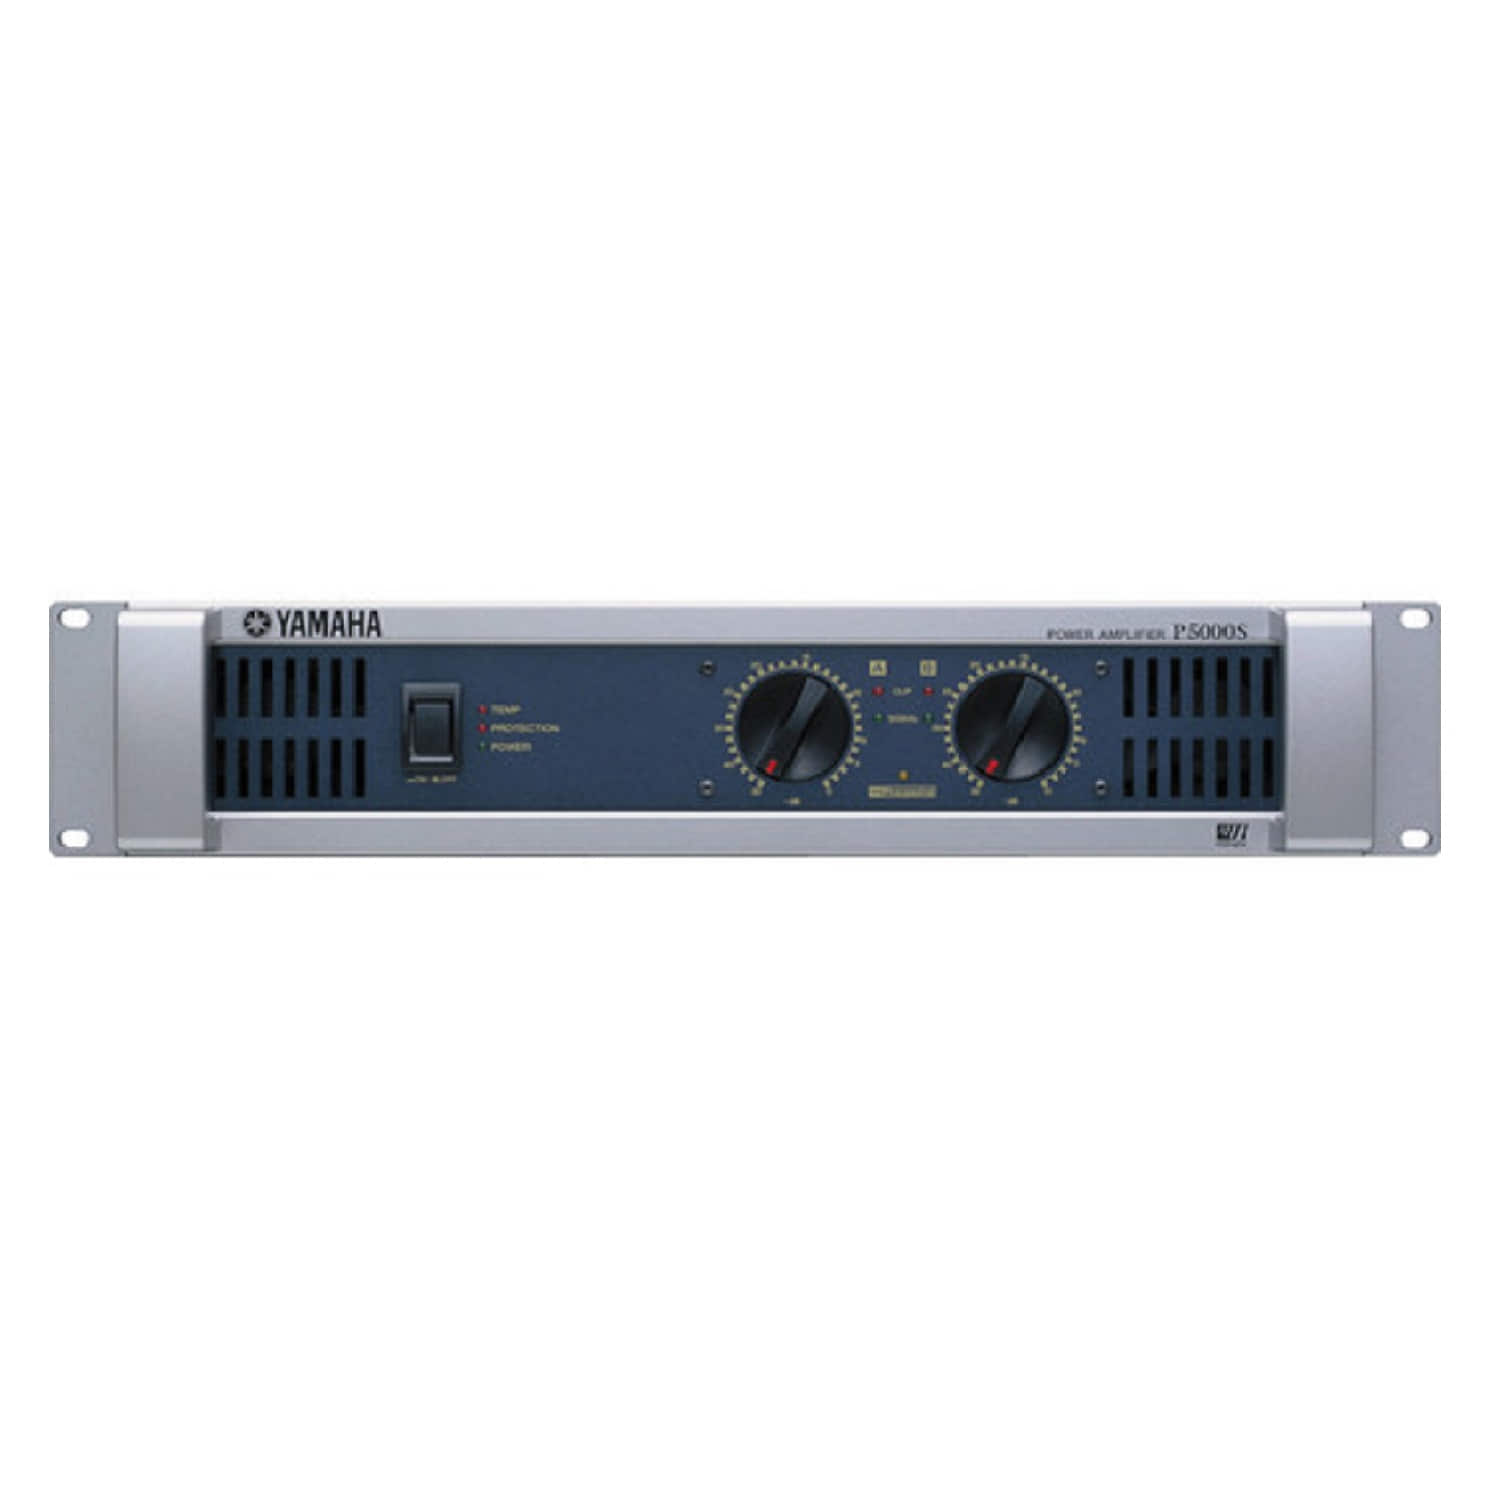 P5000S , 2Ch 500W 8ohm Stereo Power Amplifier , Yamaha